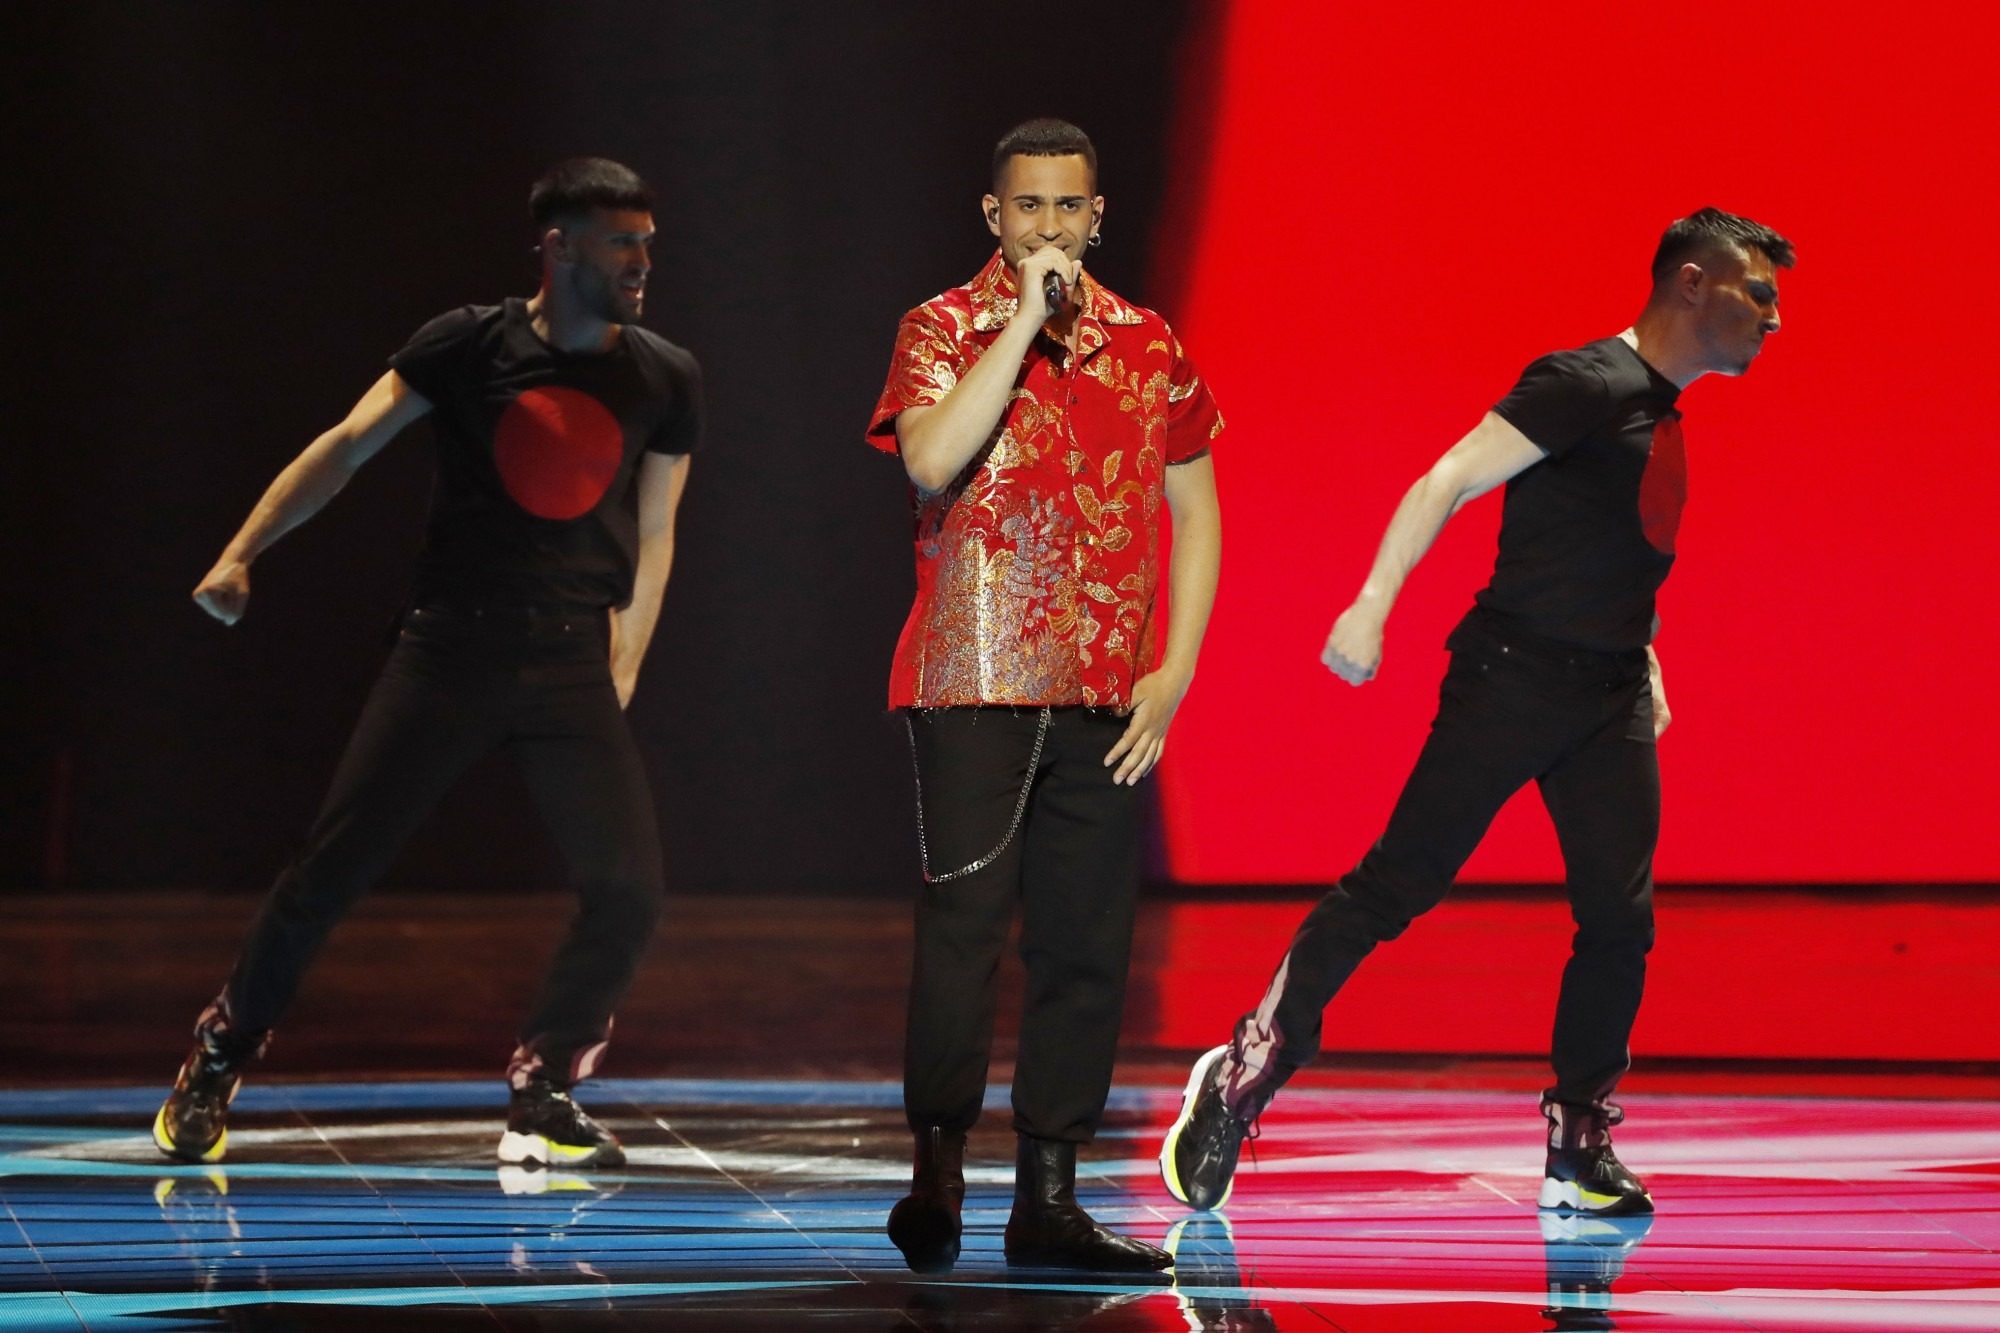 10062019_080551_mahmood-representing-italy-performs-live-on-stage-during-news-photo-1150144227-1558252423_grande